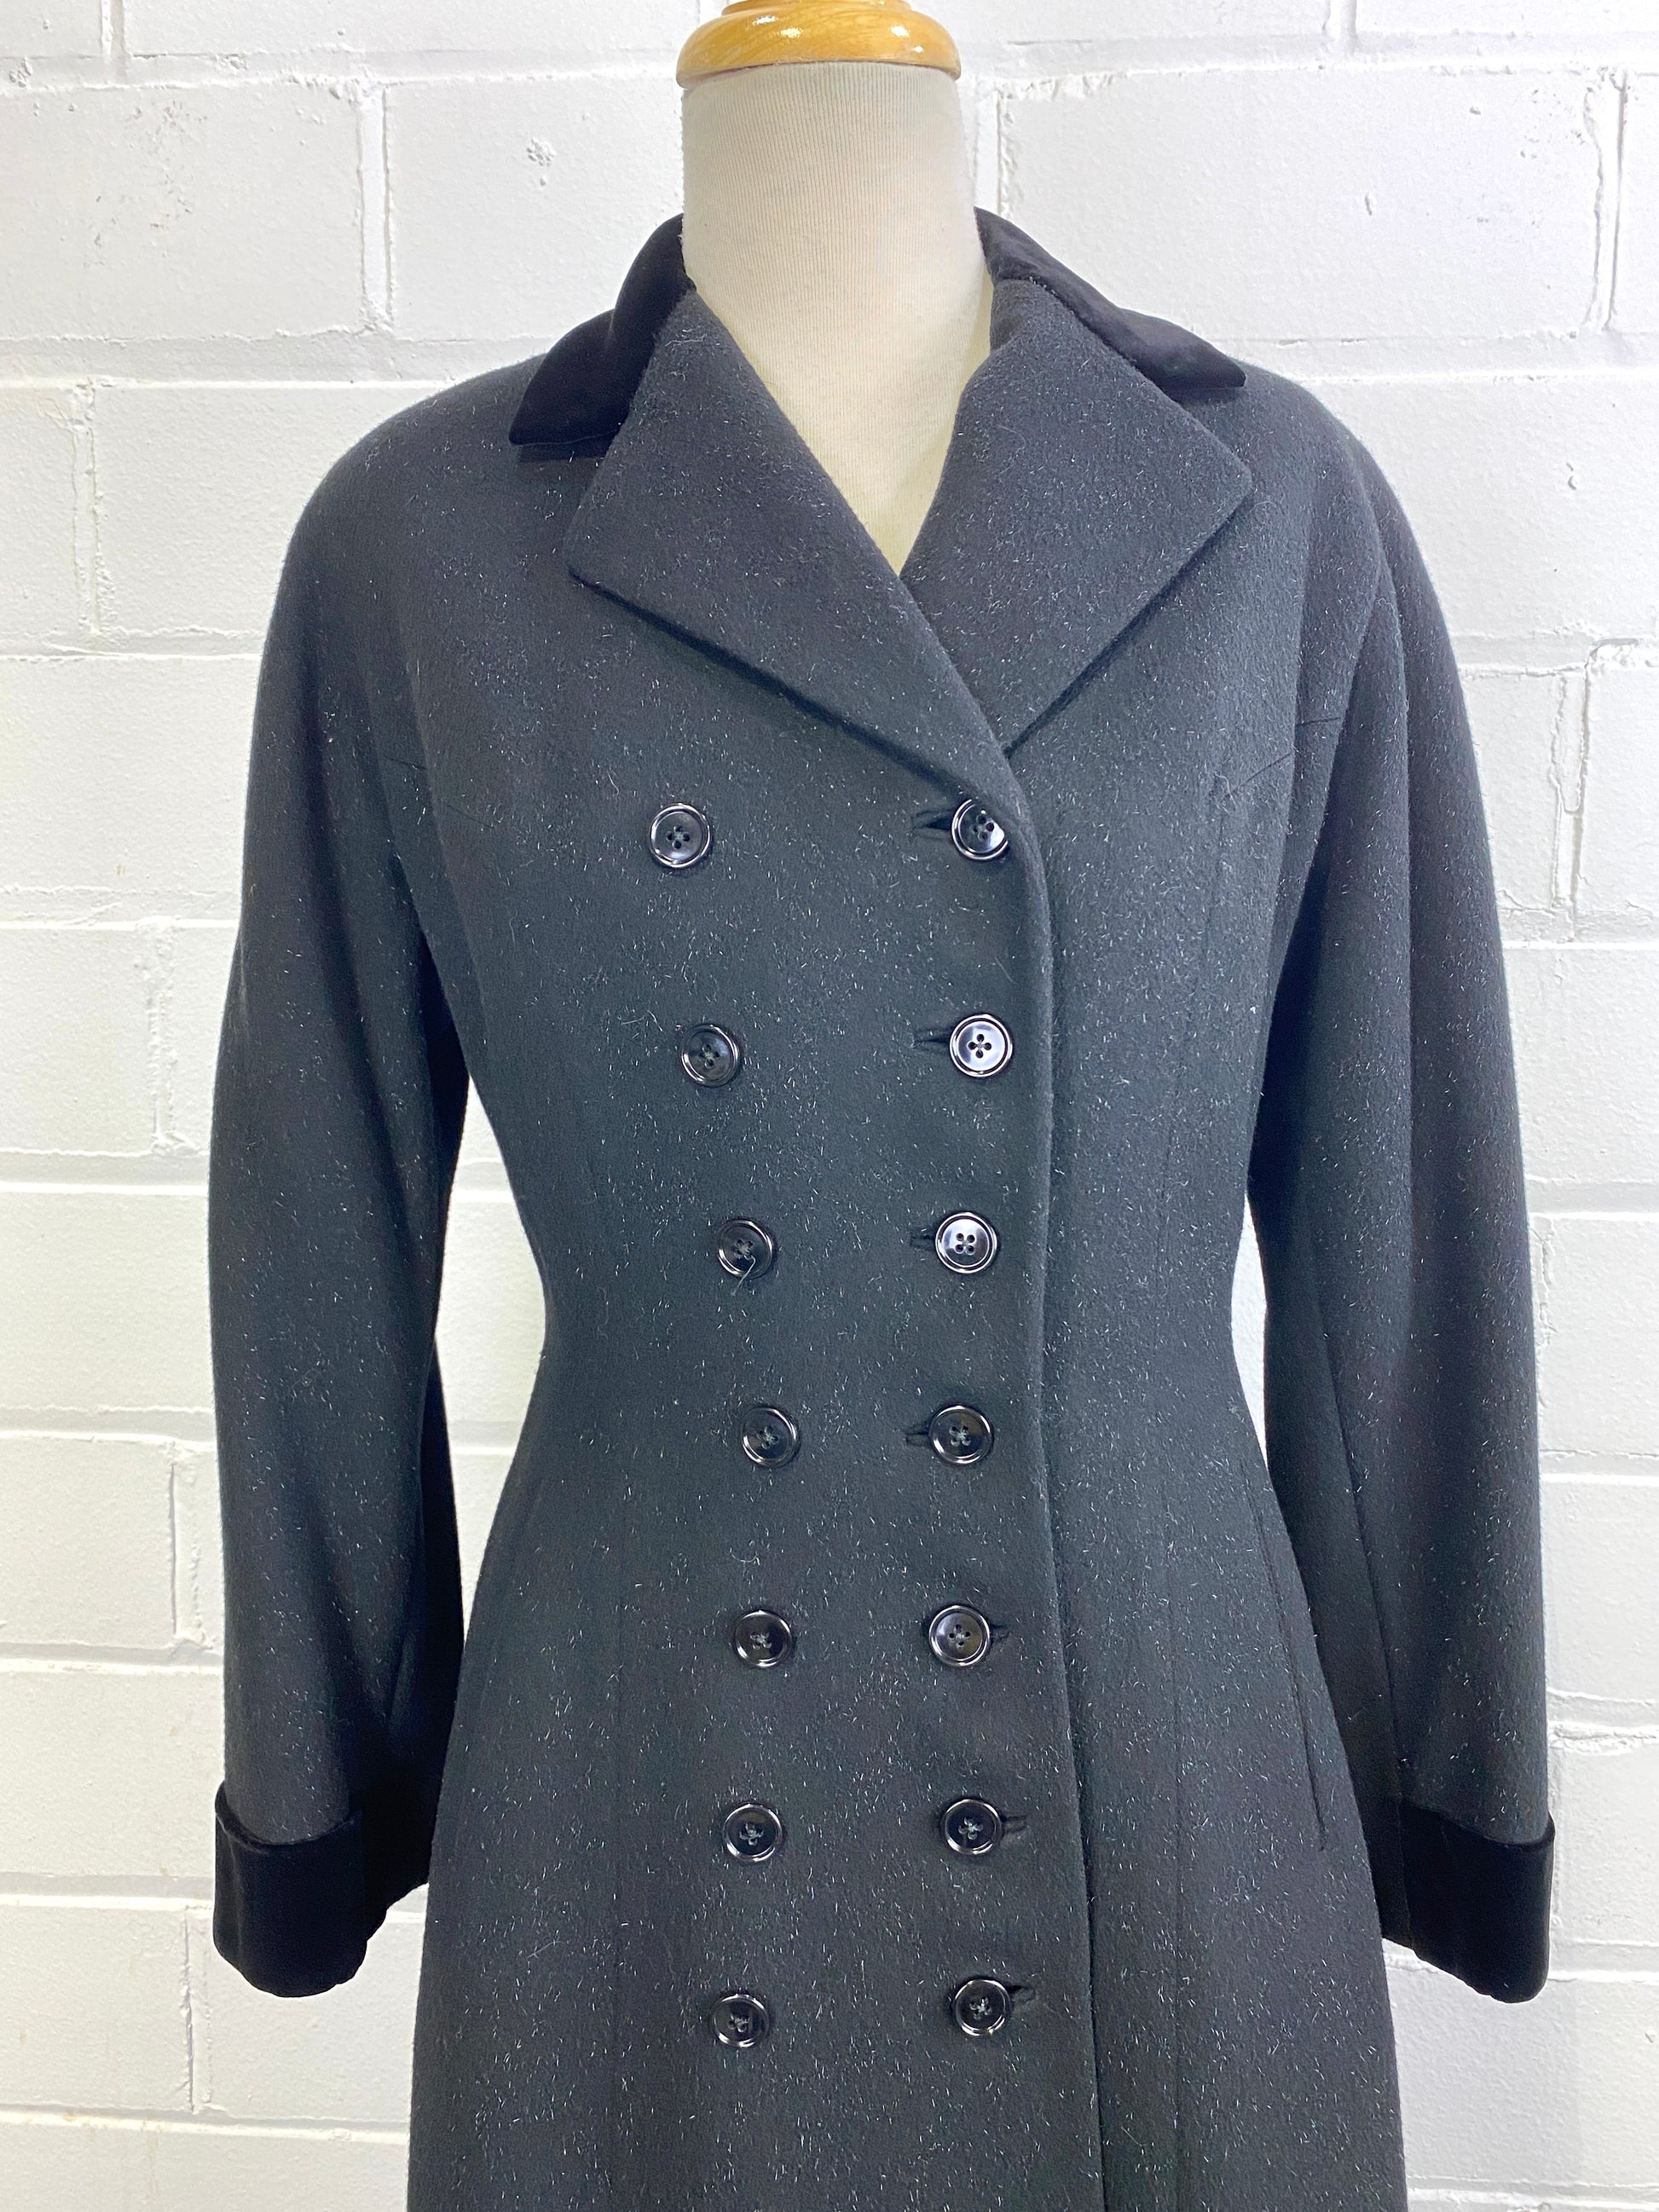 Vintage 1950s Black Wool Military-Style Double Breast Coat, XS-S